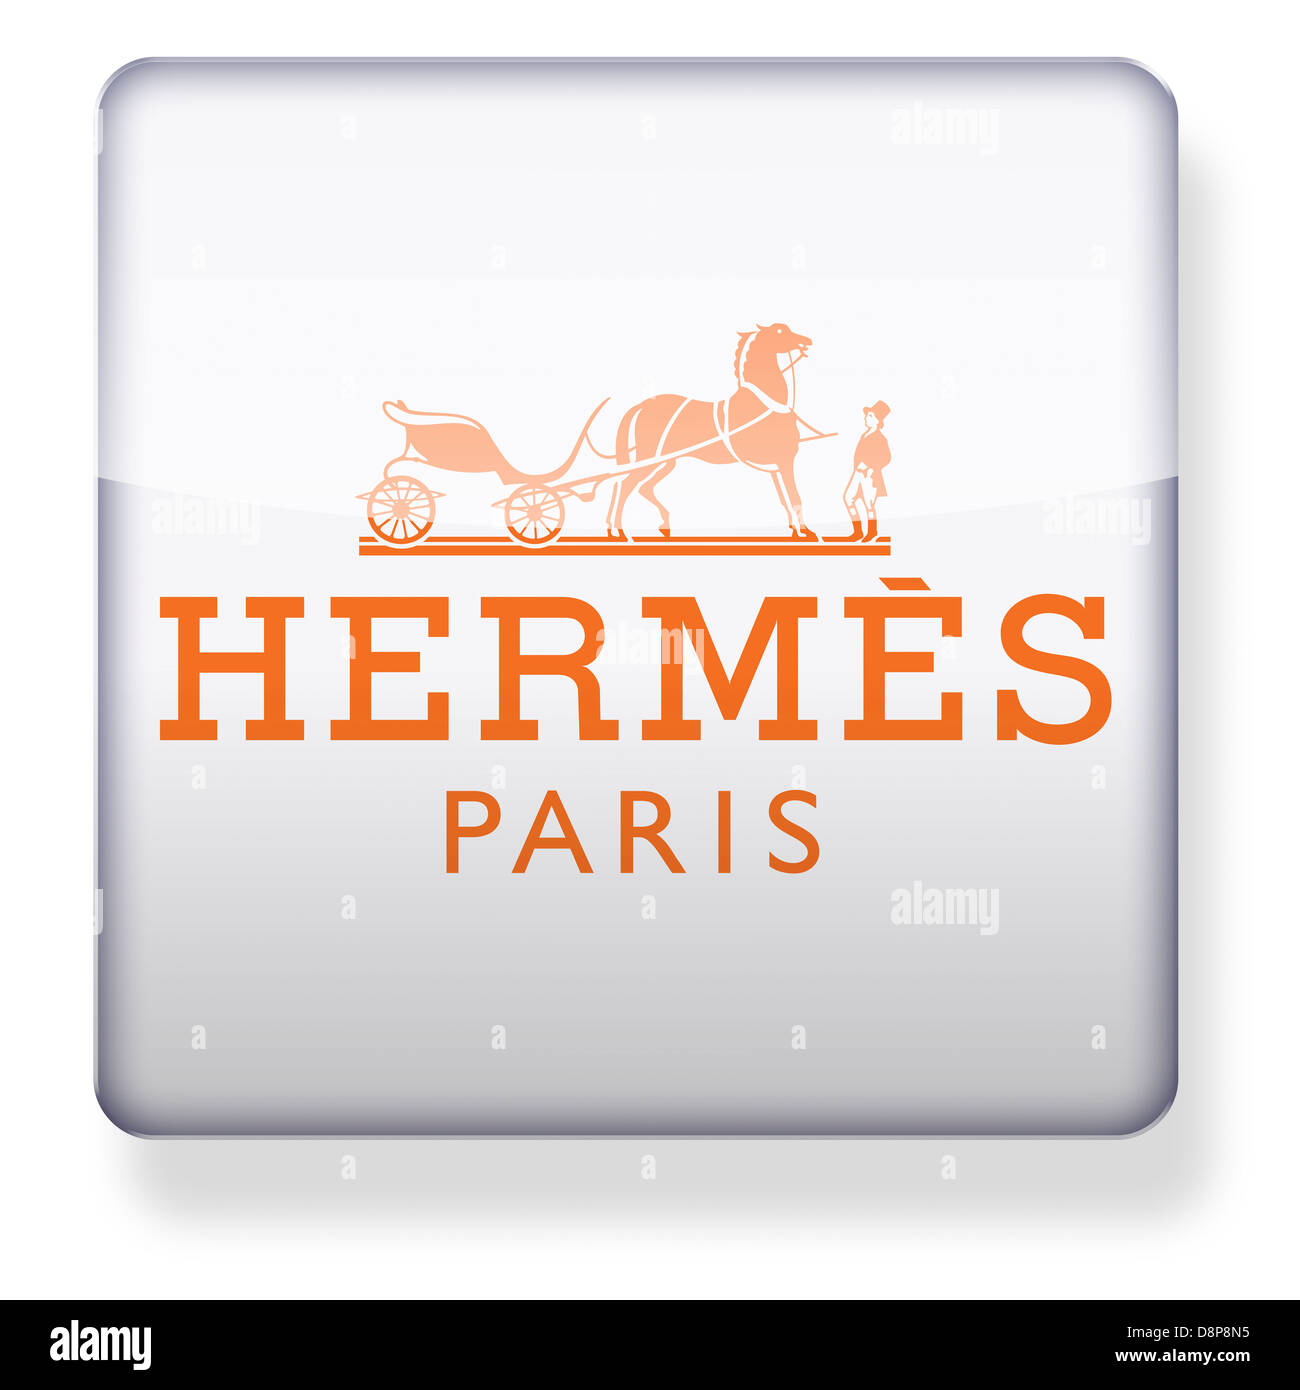 PARIS, FRANCE -27 FEB 2021- View of the Hermes logo name on a